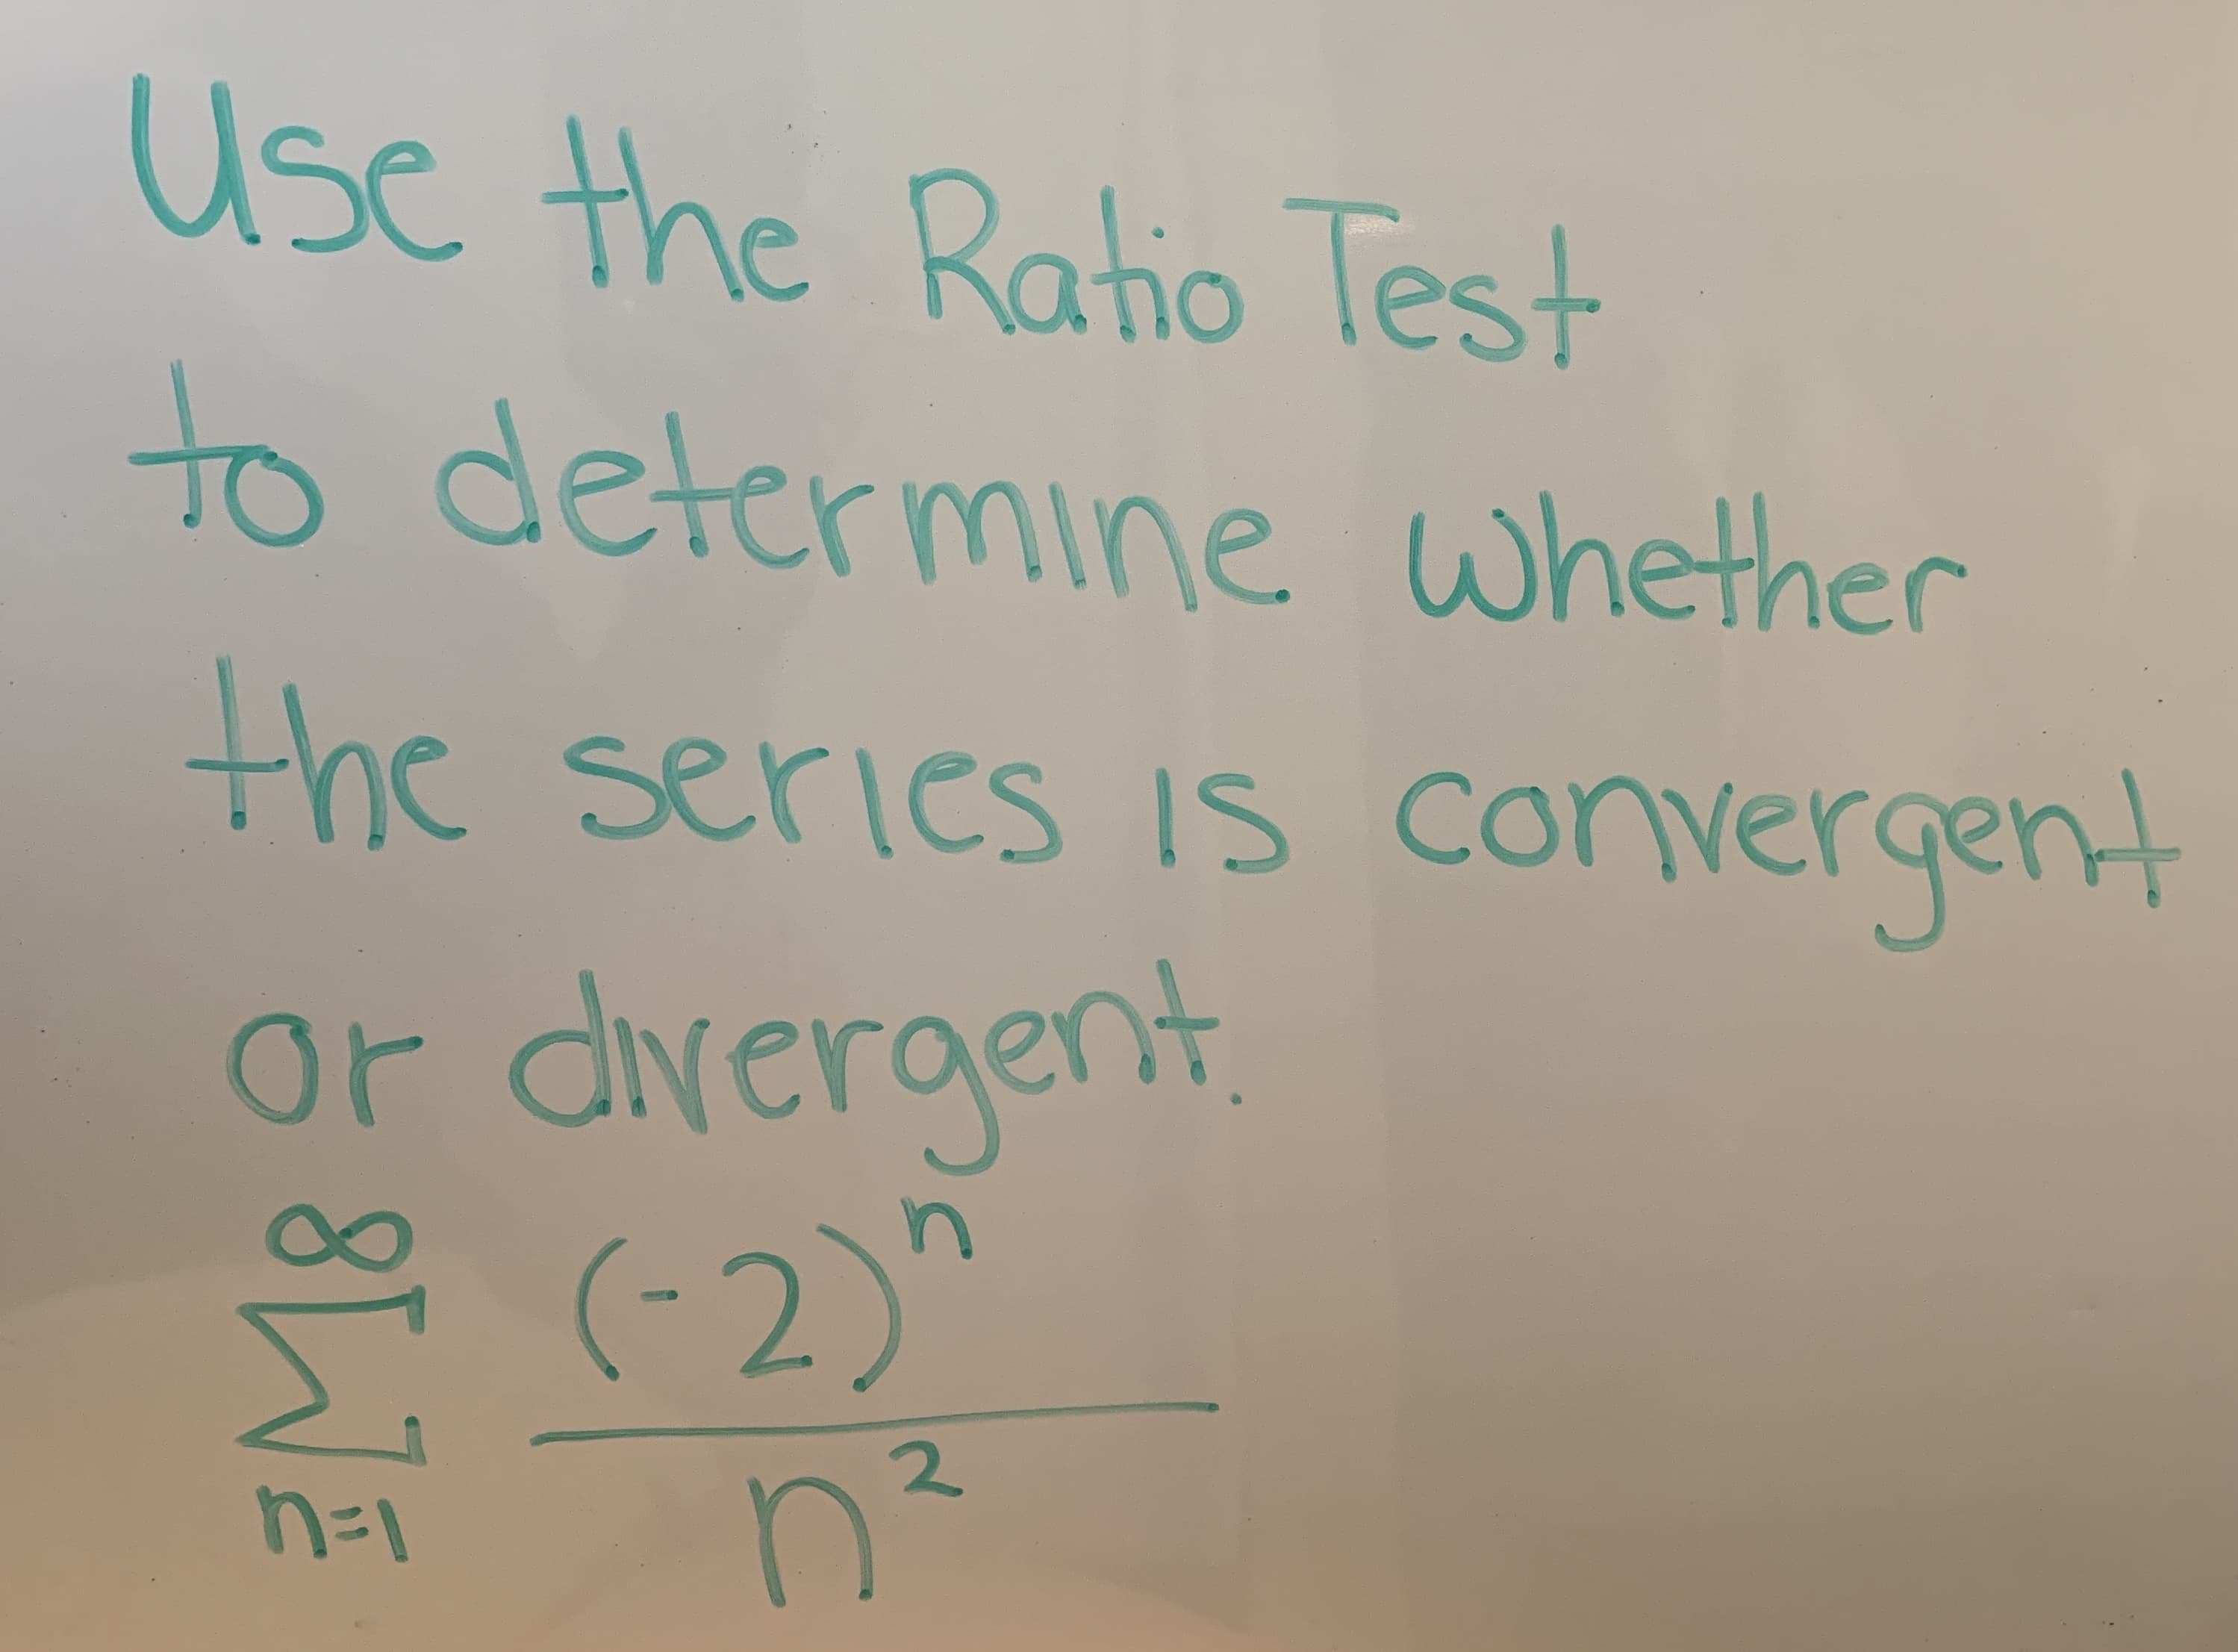 Use the Raho Test
to determine whethen
the serics is convergen
Or dveraent
2.
